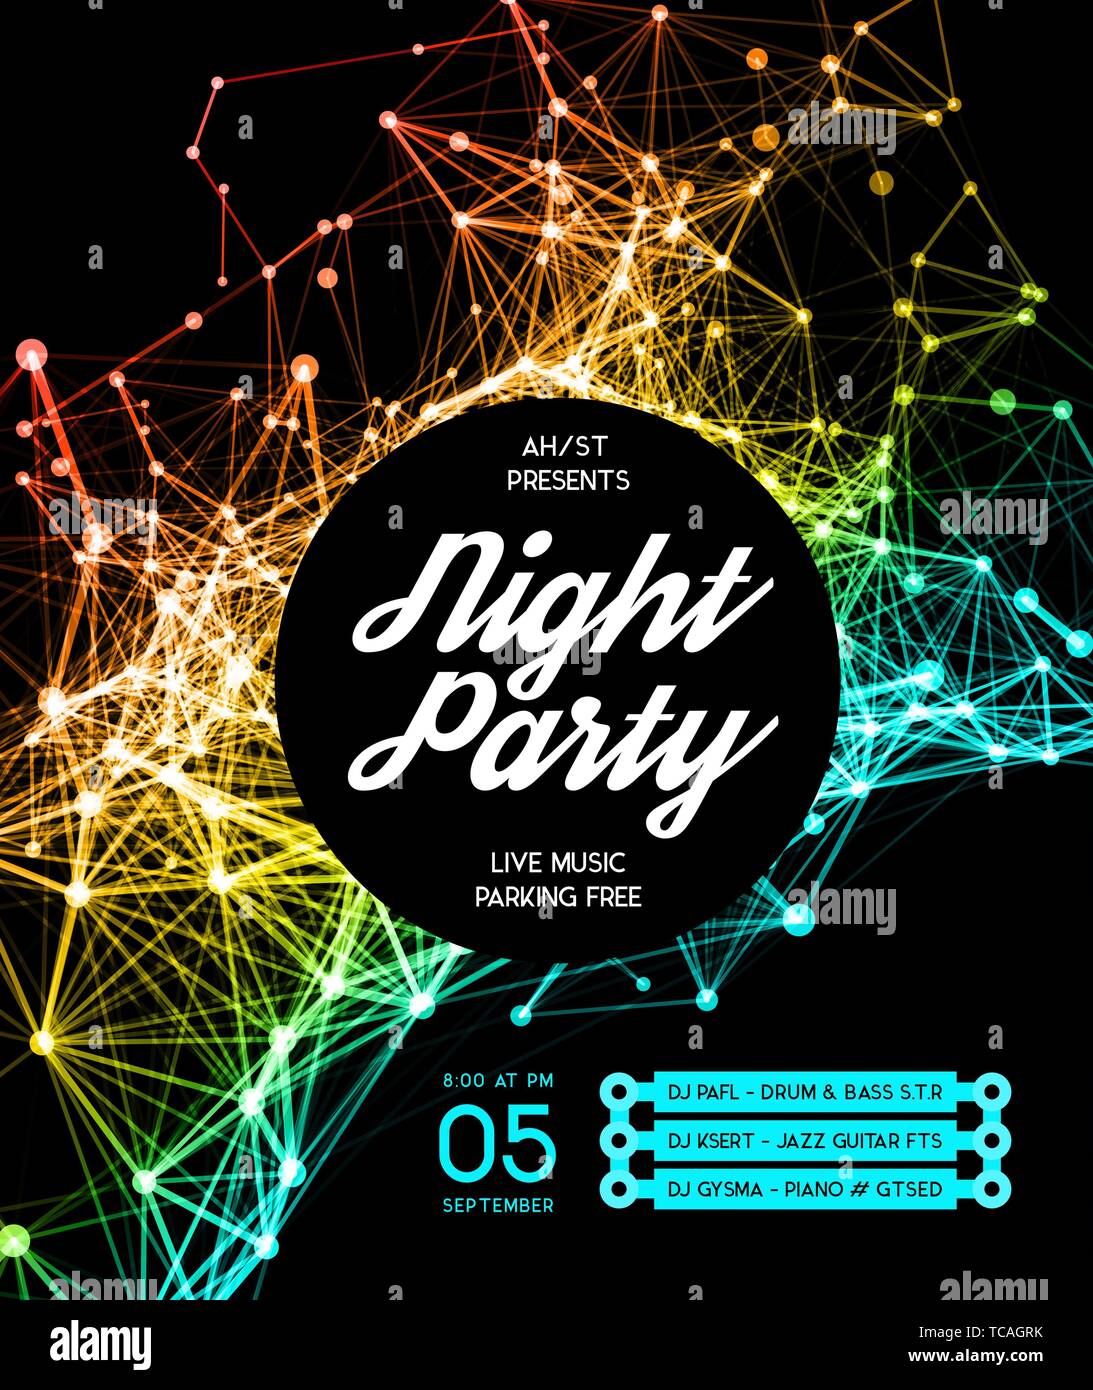 night-disco-party-poster-background-template-vector-illustration